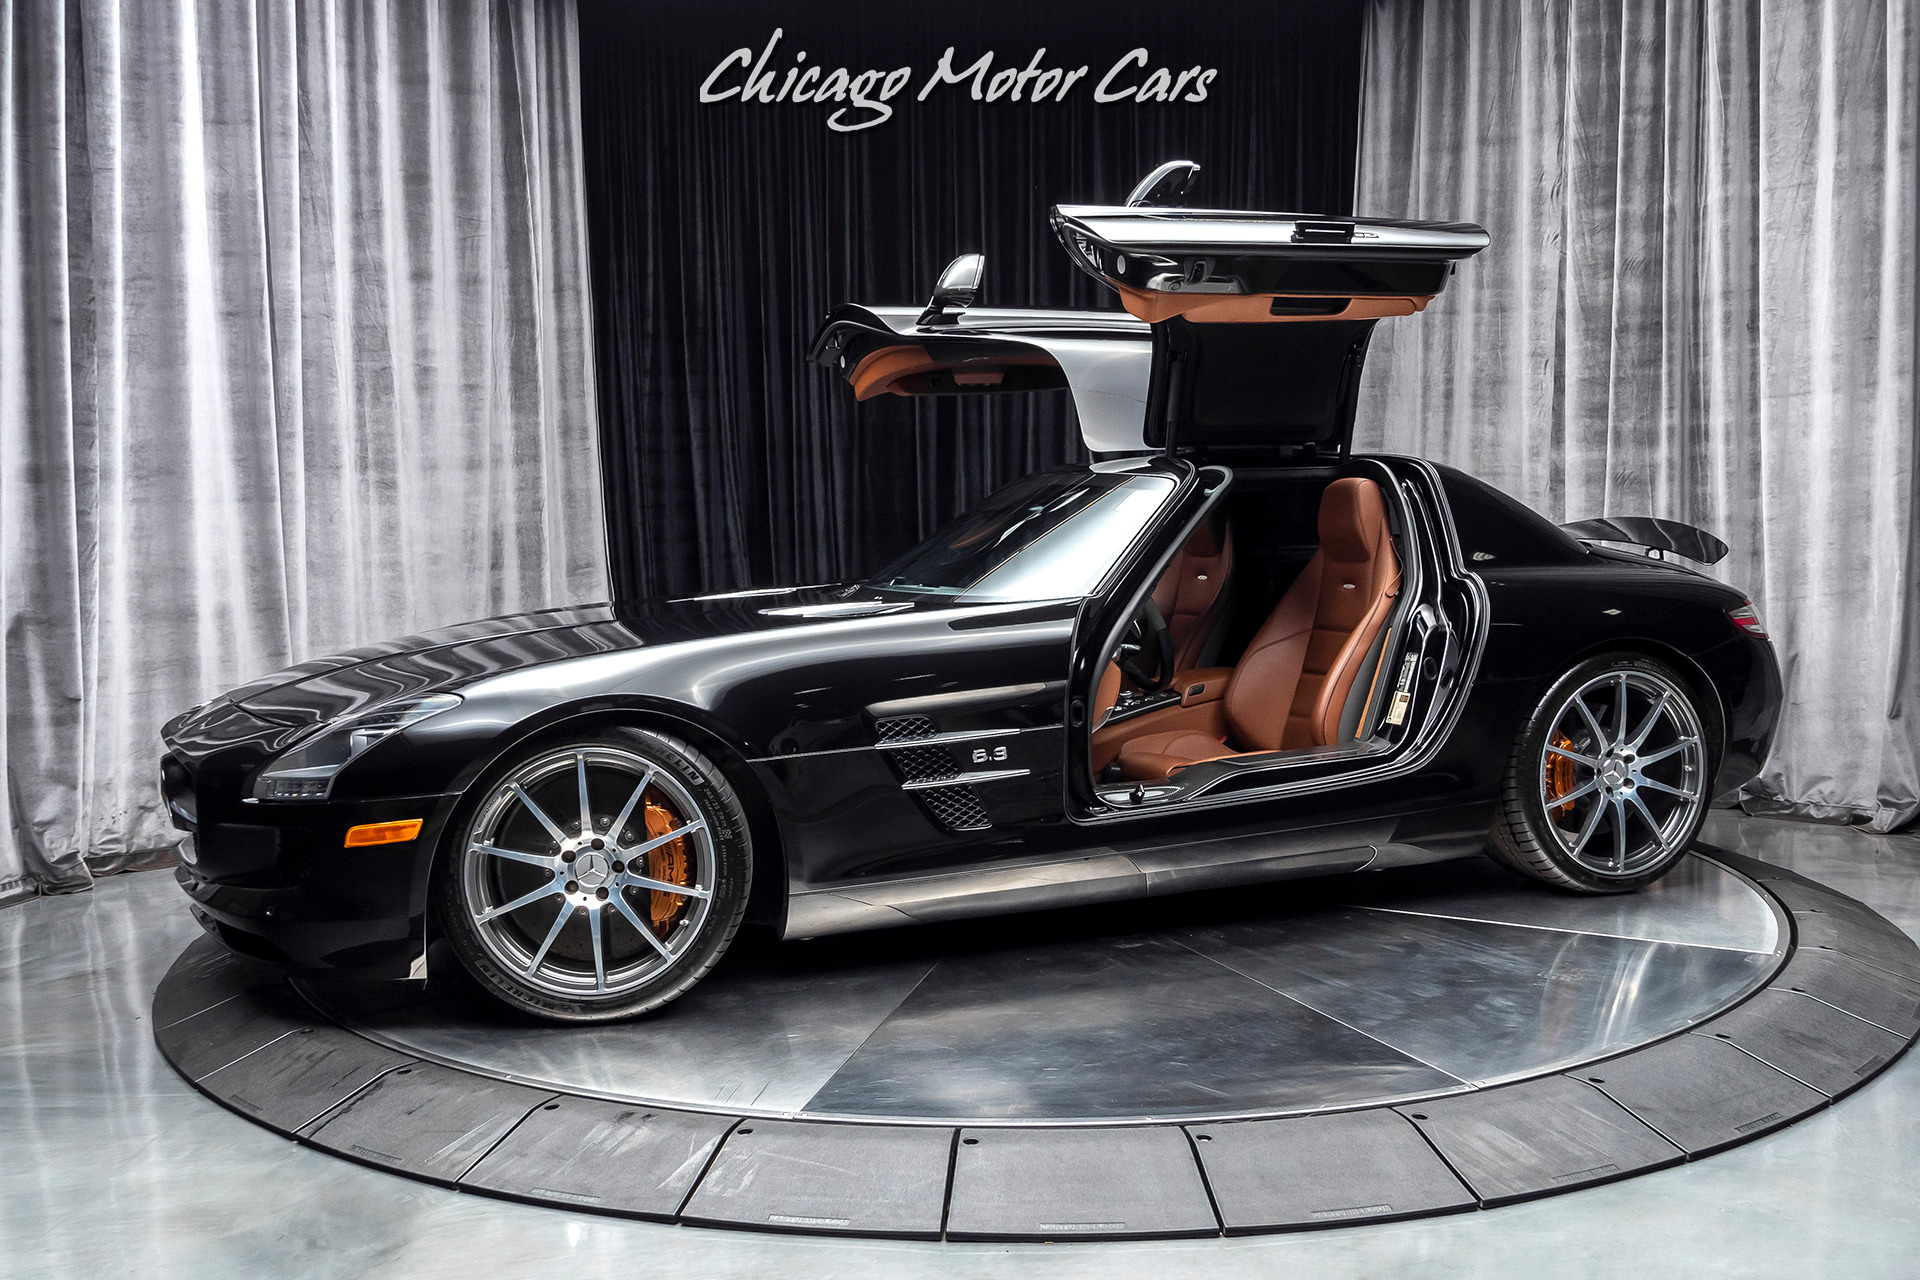 Used 2011 Mercedes-Benz SLS AMG Gullwing Coupe MSRP $220k+ Kleemann  Supercharged! Carbon Fiber! LOADED For Sale (Special Pricing) | Chicago  Motor Cars Stock #19778